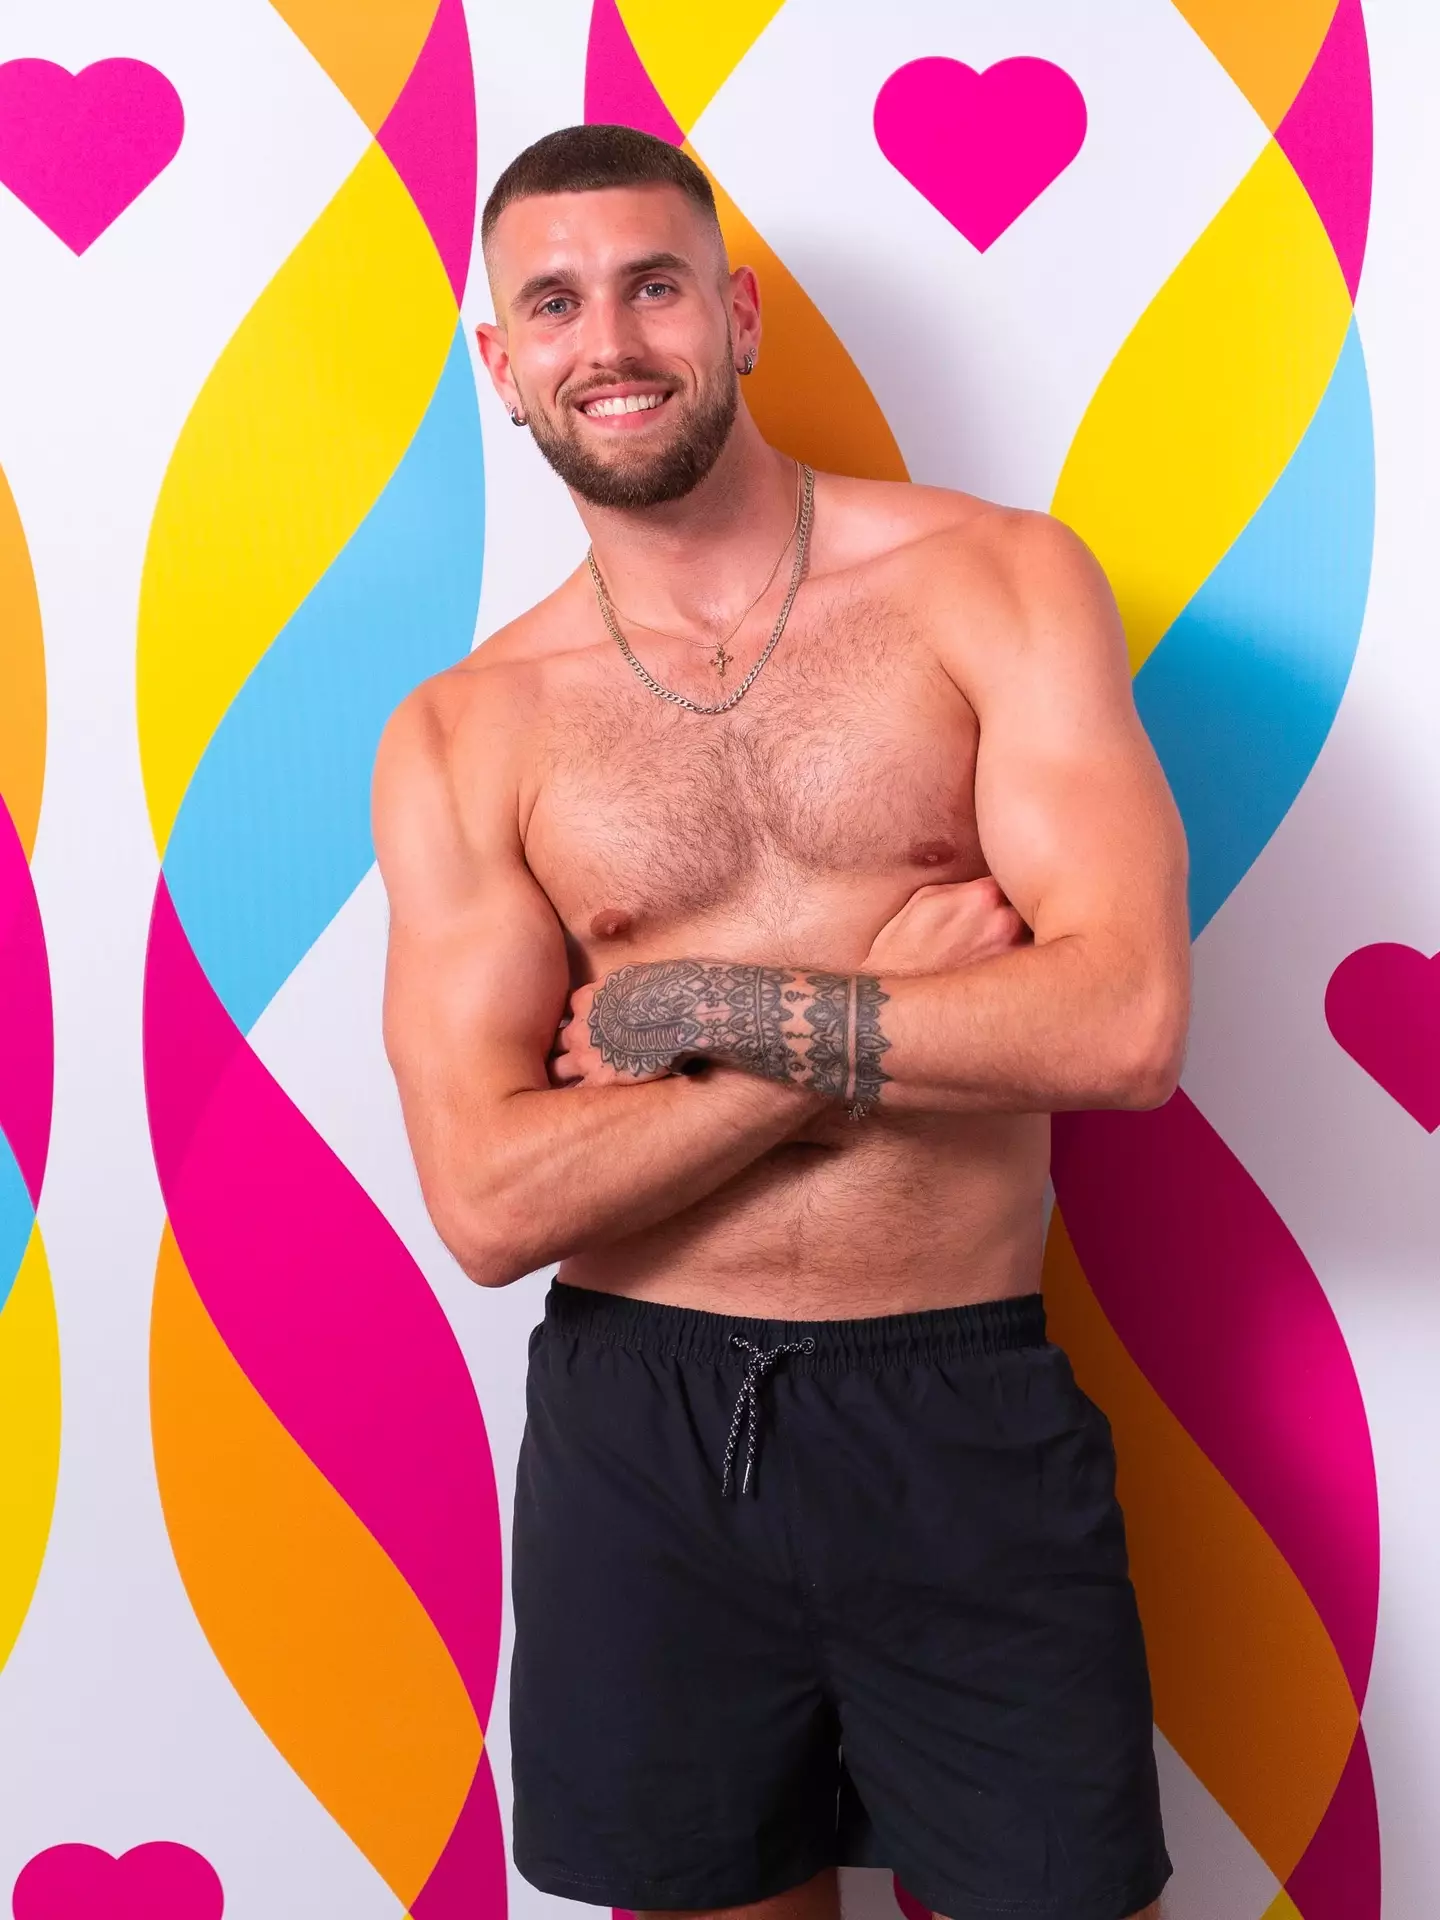 Zachariah Noble is starring on this summer's season of Love Island.